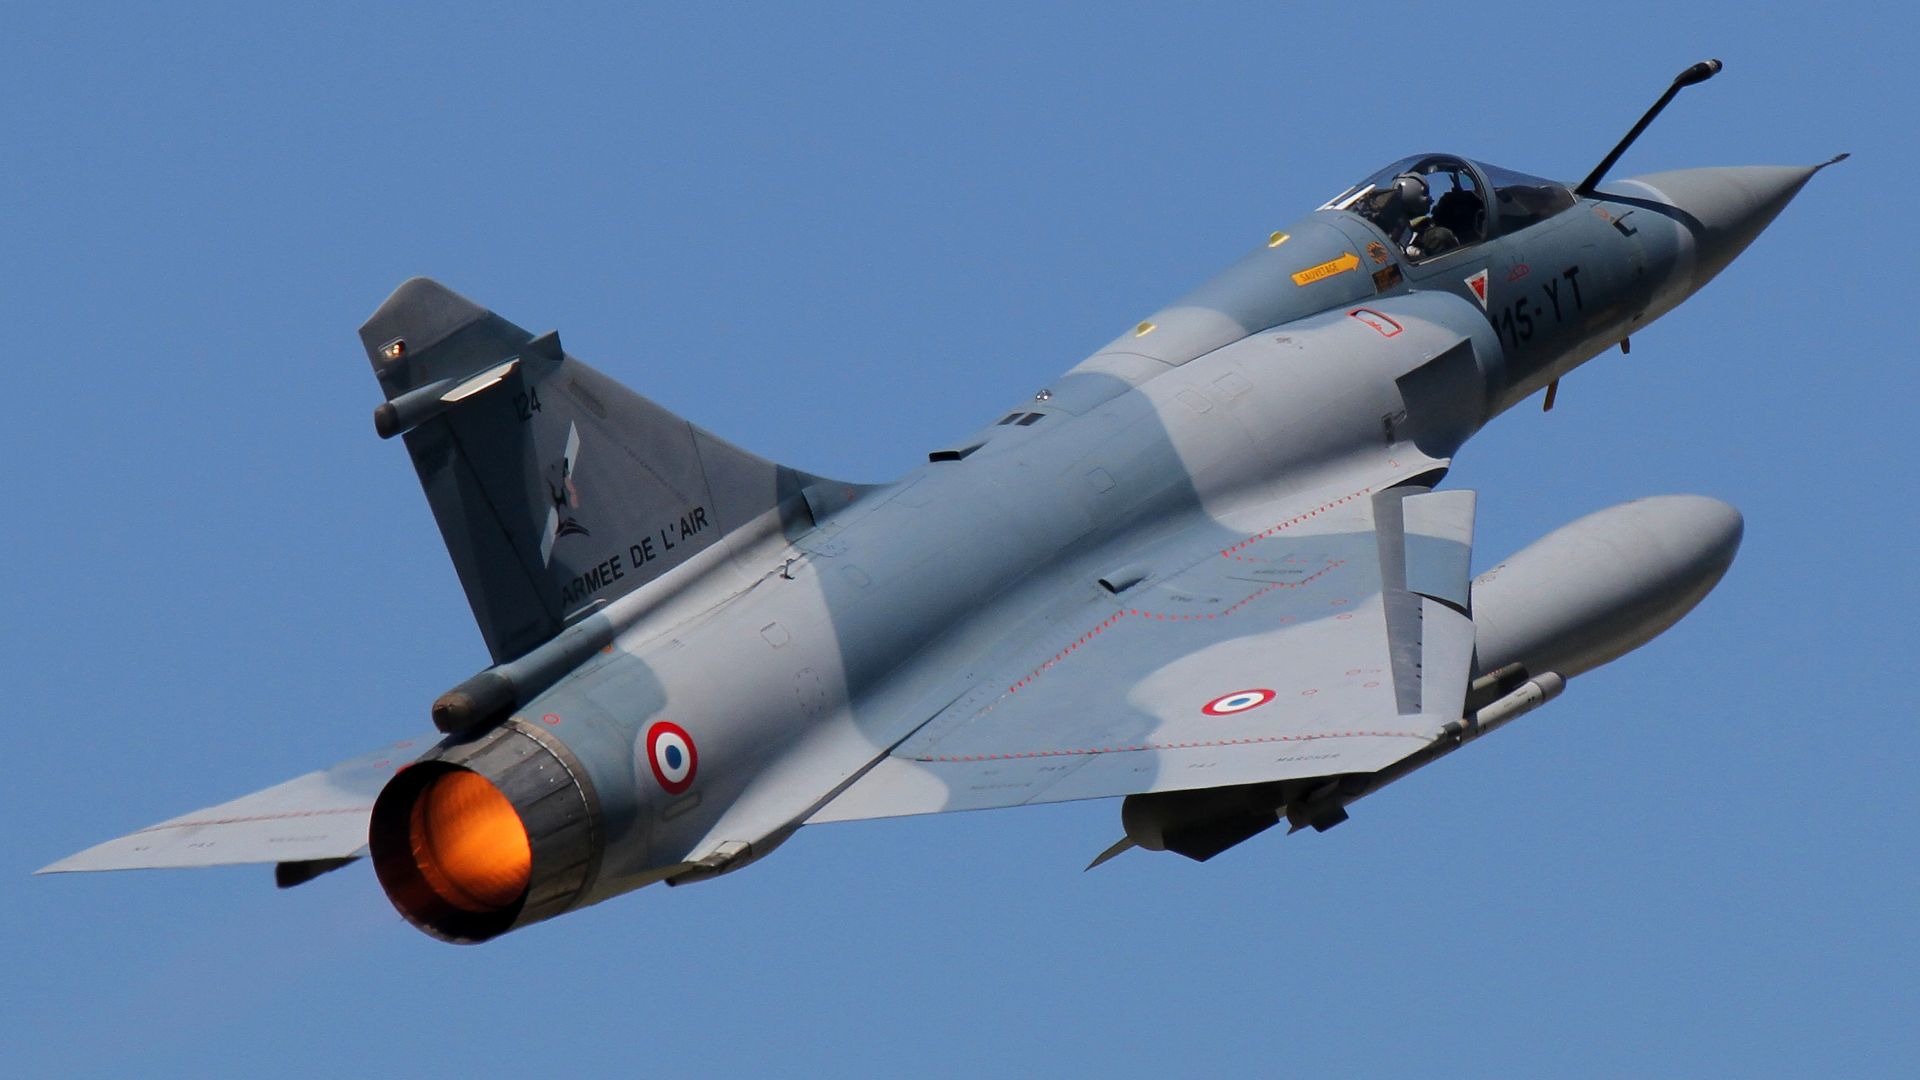 Dassault Mirage 2000, fighter aircraft, French Air Force (horizontal)